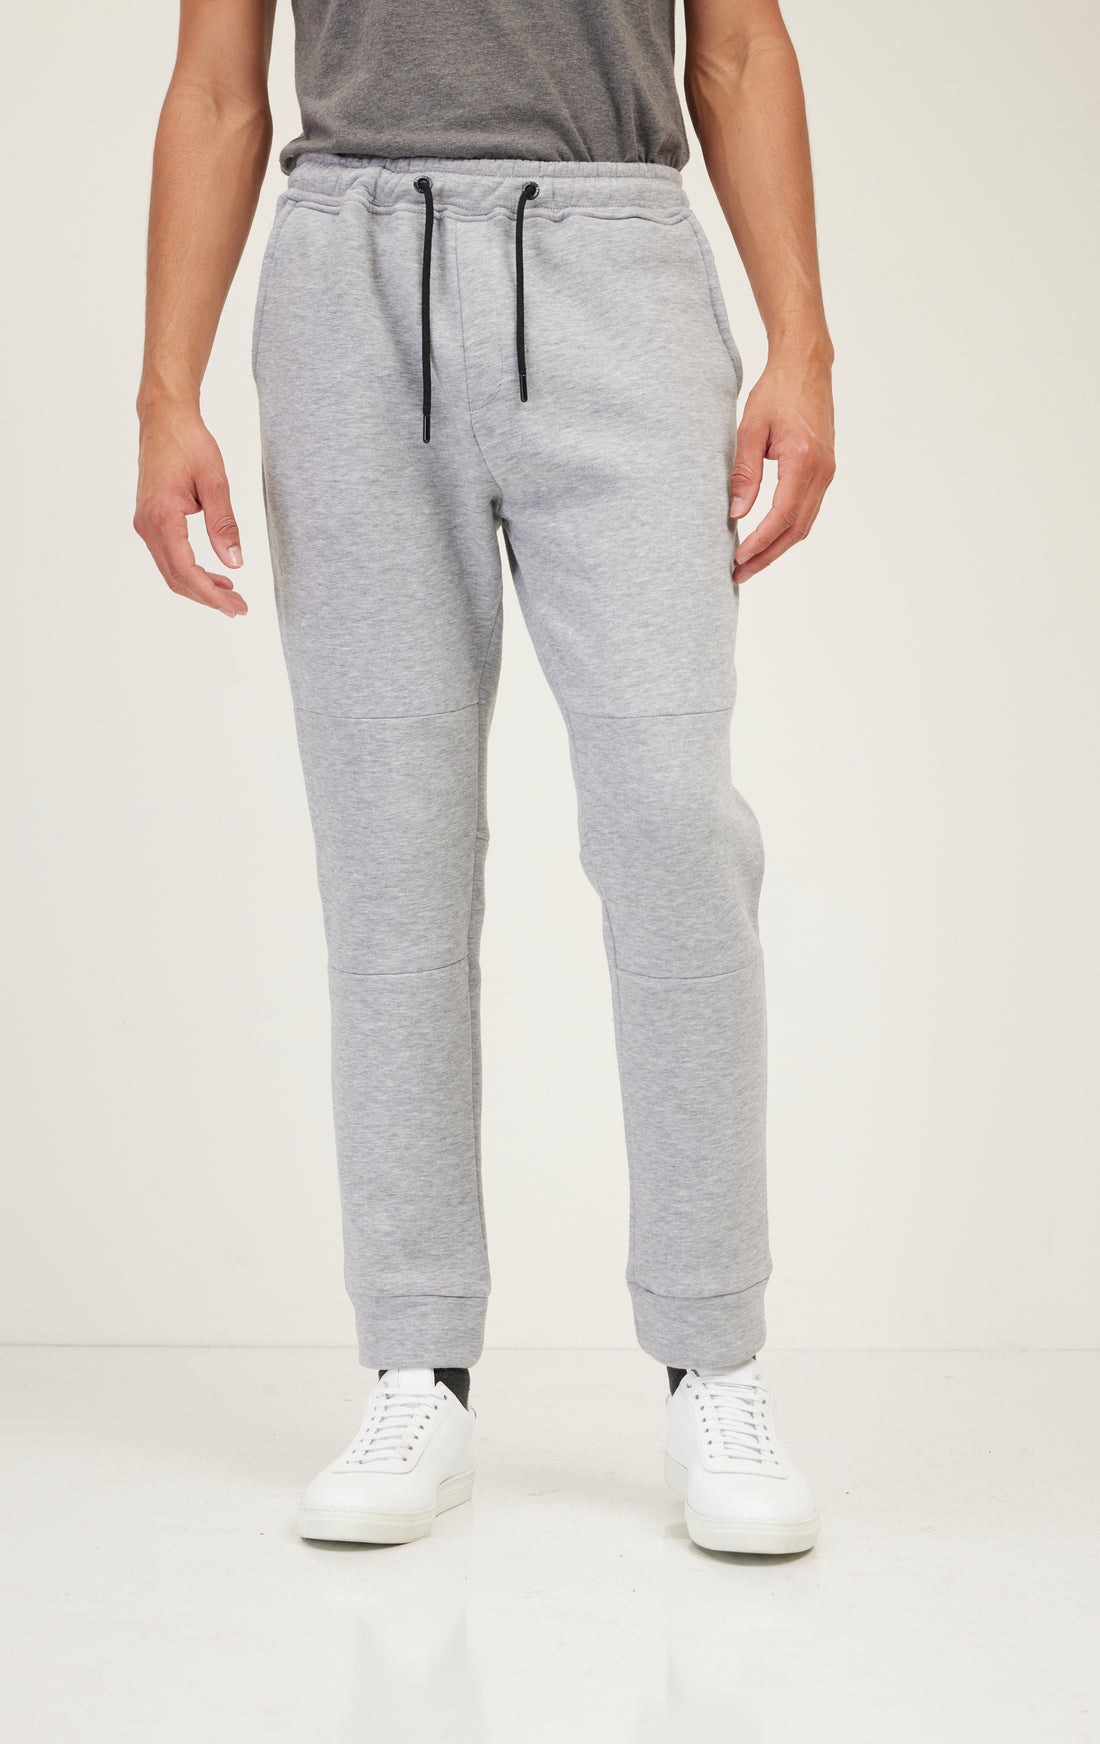 Fitted Drawstring Sweatpants - Grey